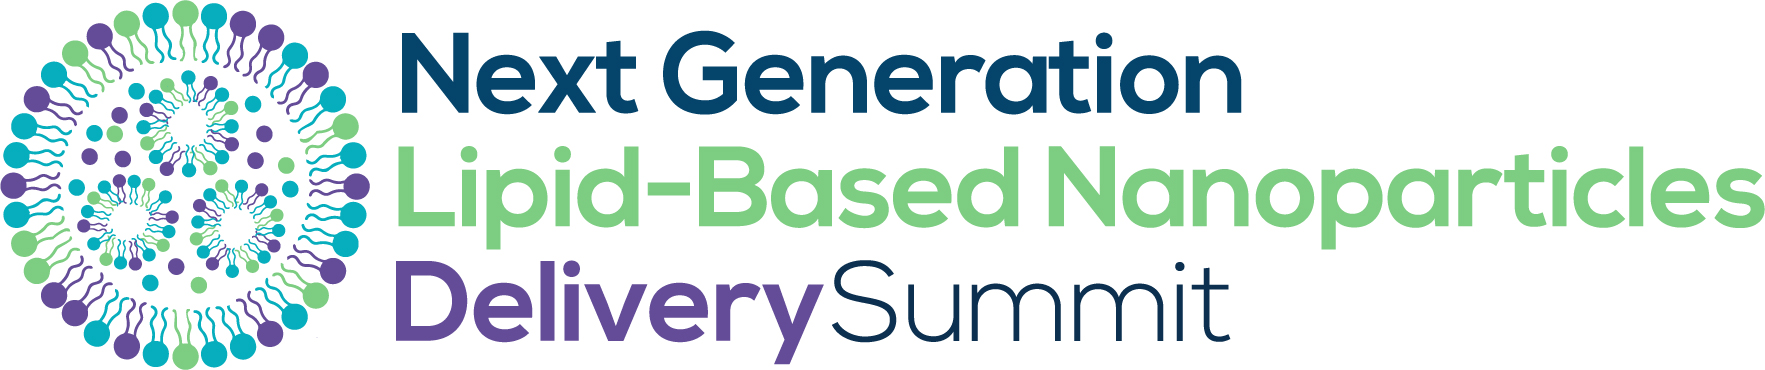 HW220206 25824 - Next Generation Lipid-Based Nanoparticles Delivery Summit logo